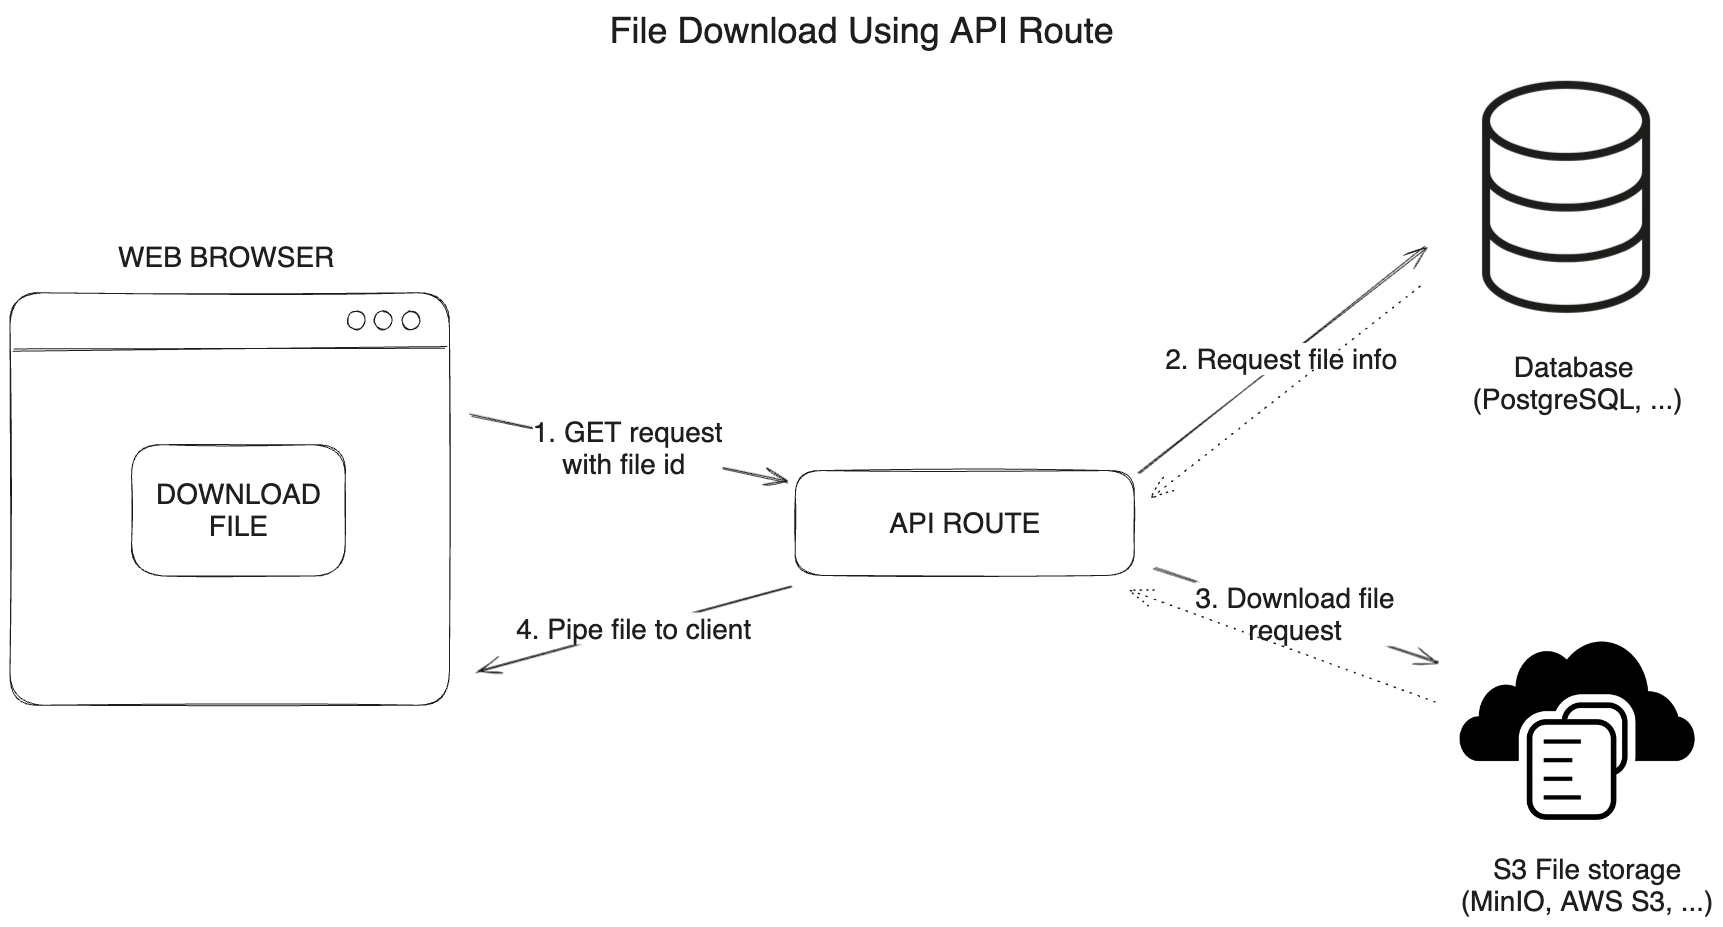 Download files using Next.js API route